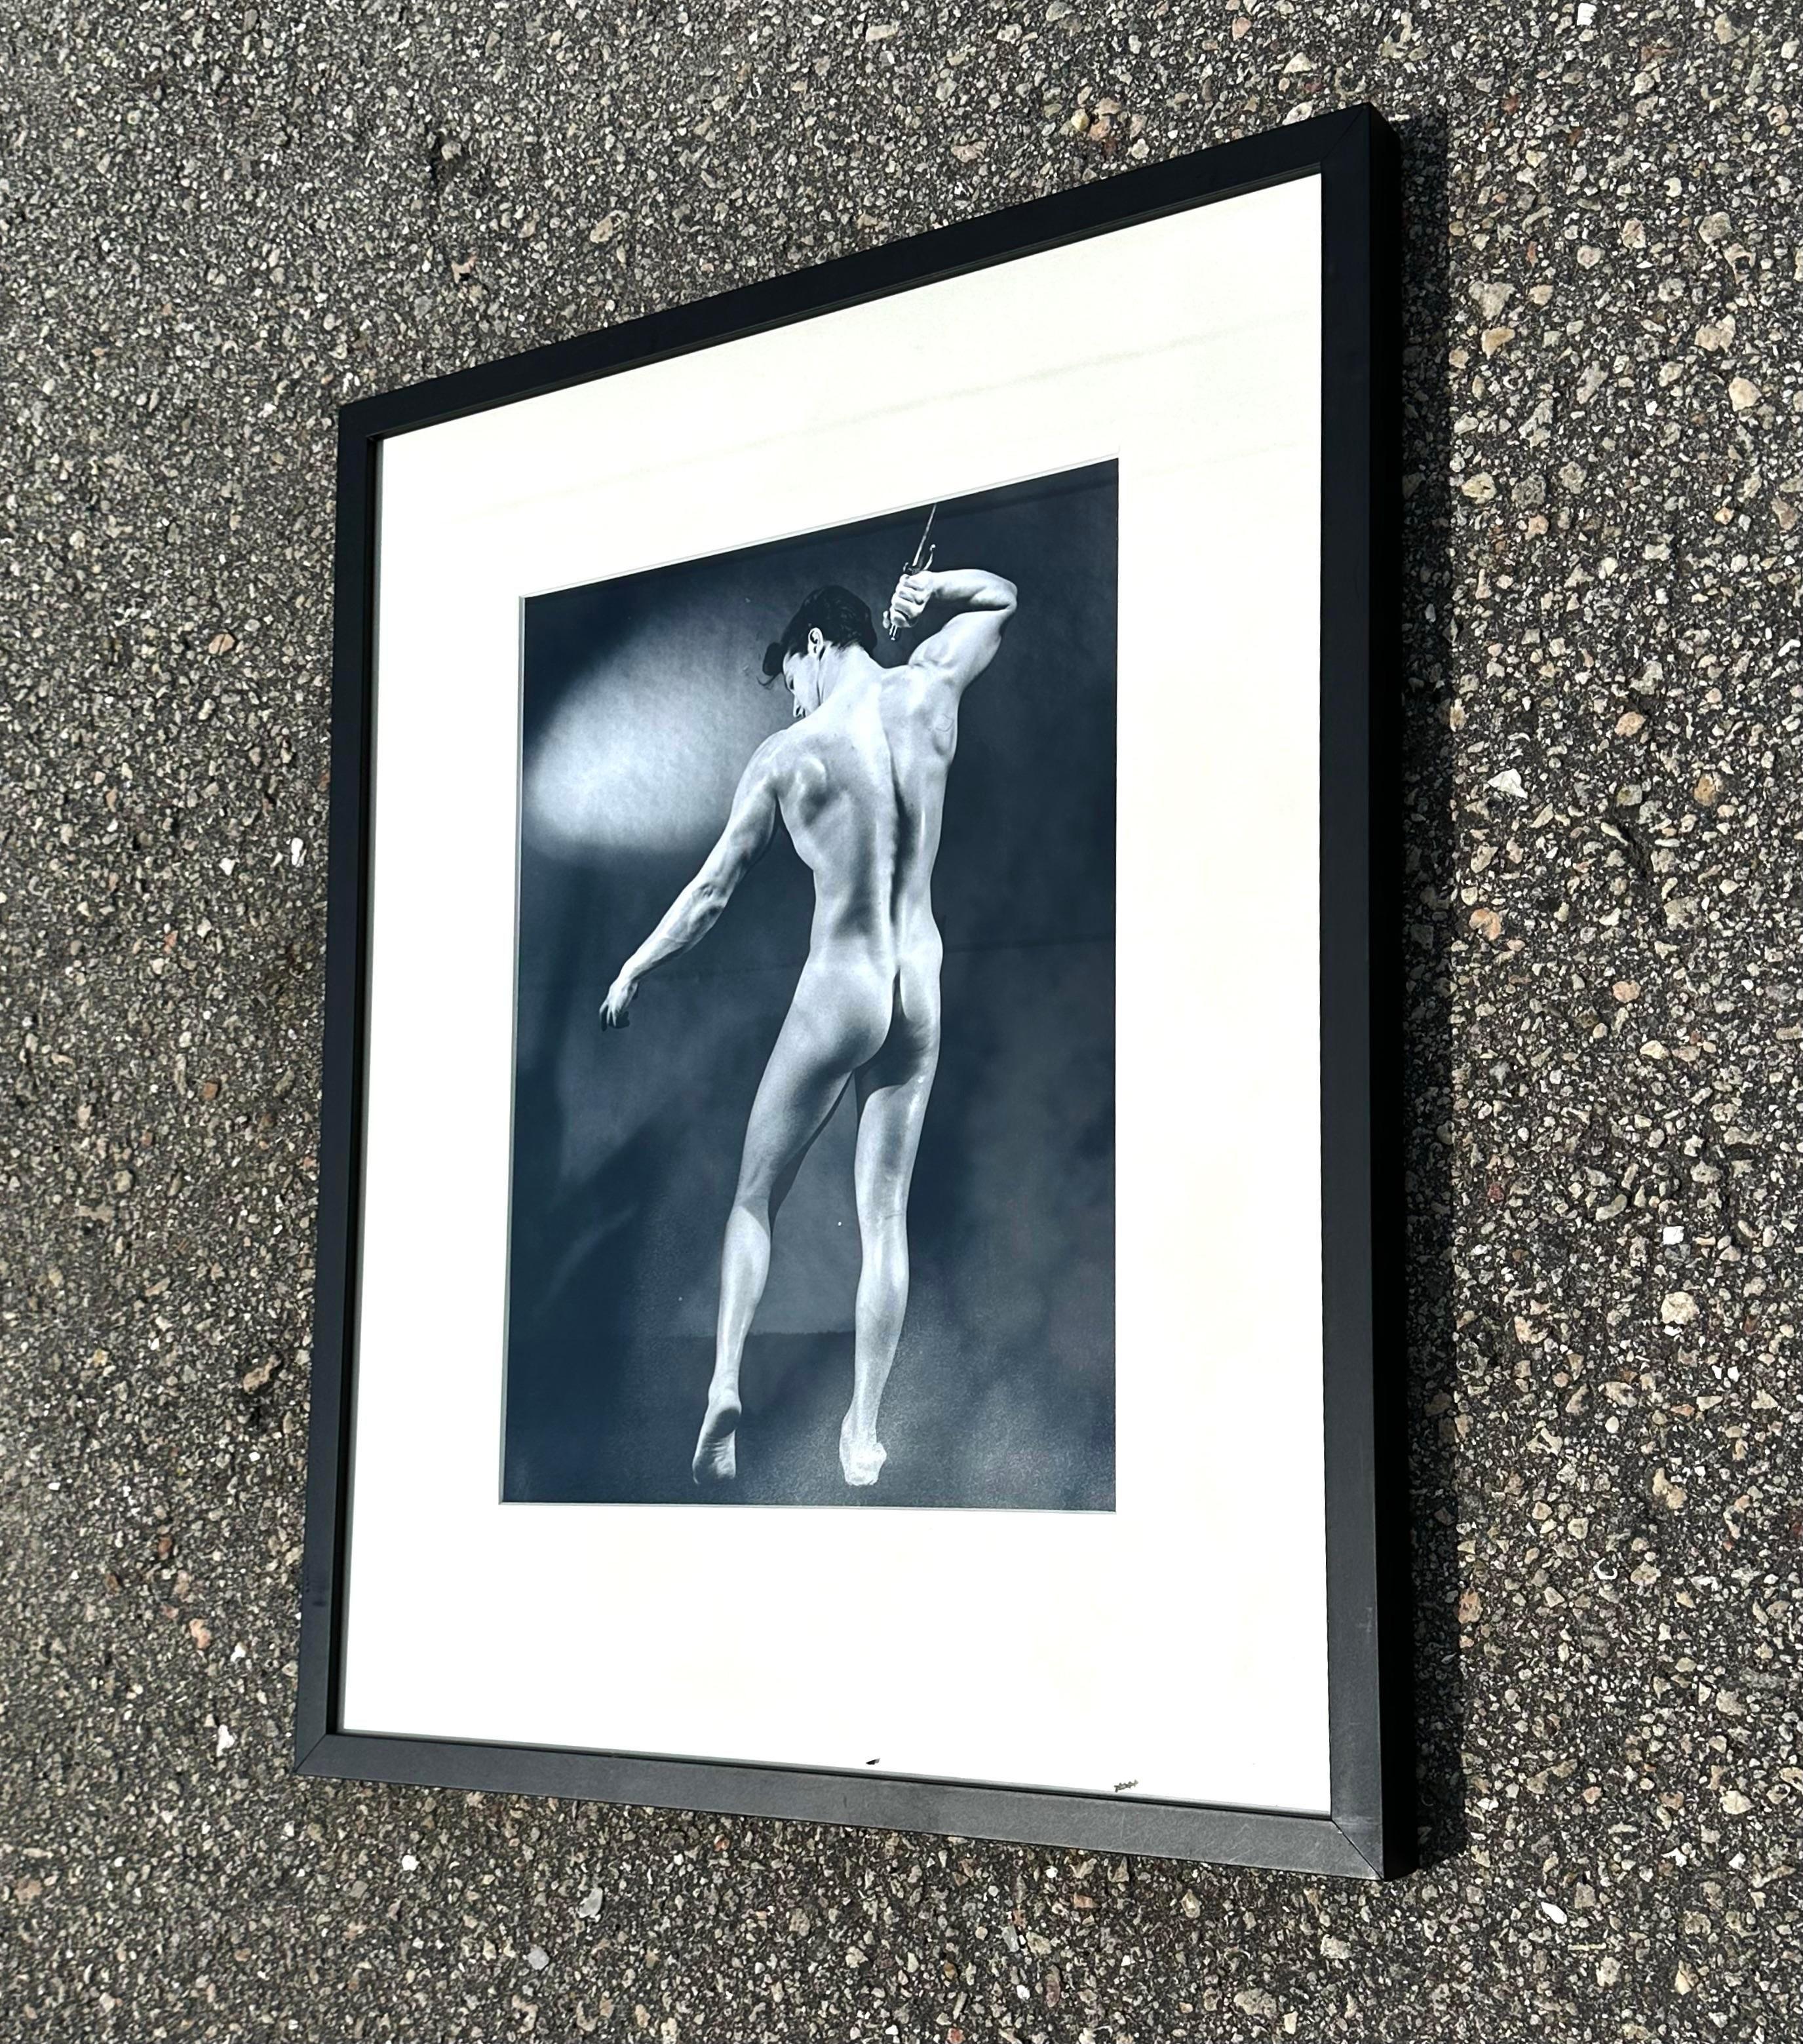 This attention grabbing photo depicts a strong nude man with his back turned to the camera. The subtle monotone colors make this phot bold yet tasteful. Acquired from a Palm Beach estate. 